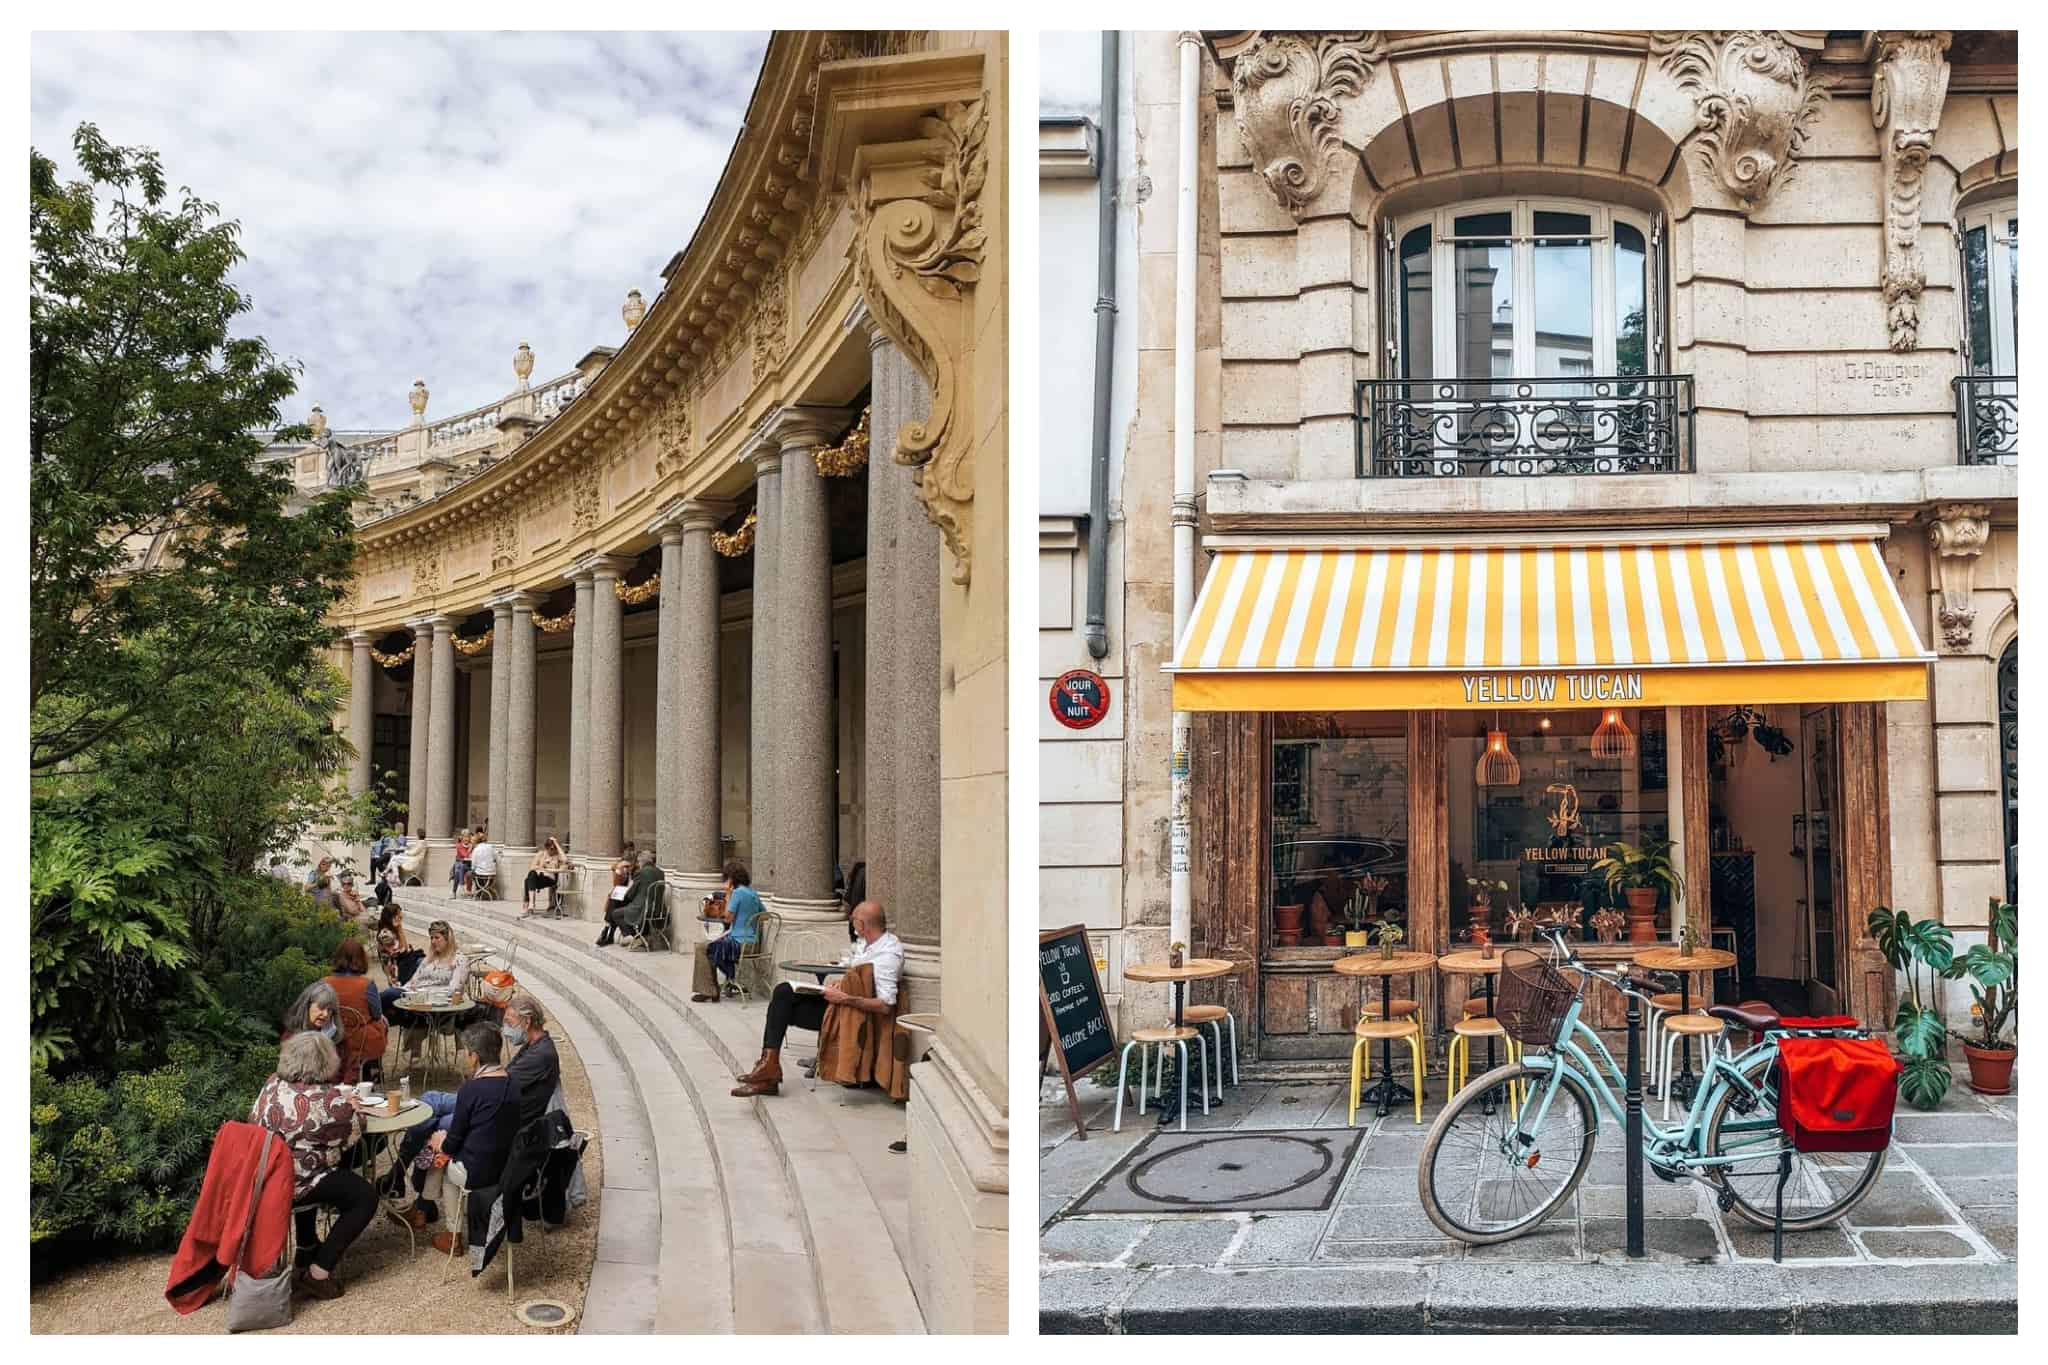 Left: Parisians are seated in an outdoor terrace in a curved roman building with pillars. Right: A small café called Yellow Tucan is pictured with a bike parked in front of it.